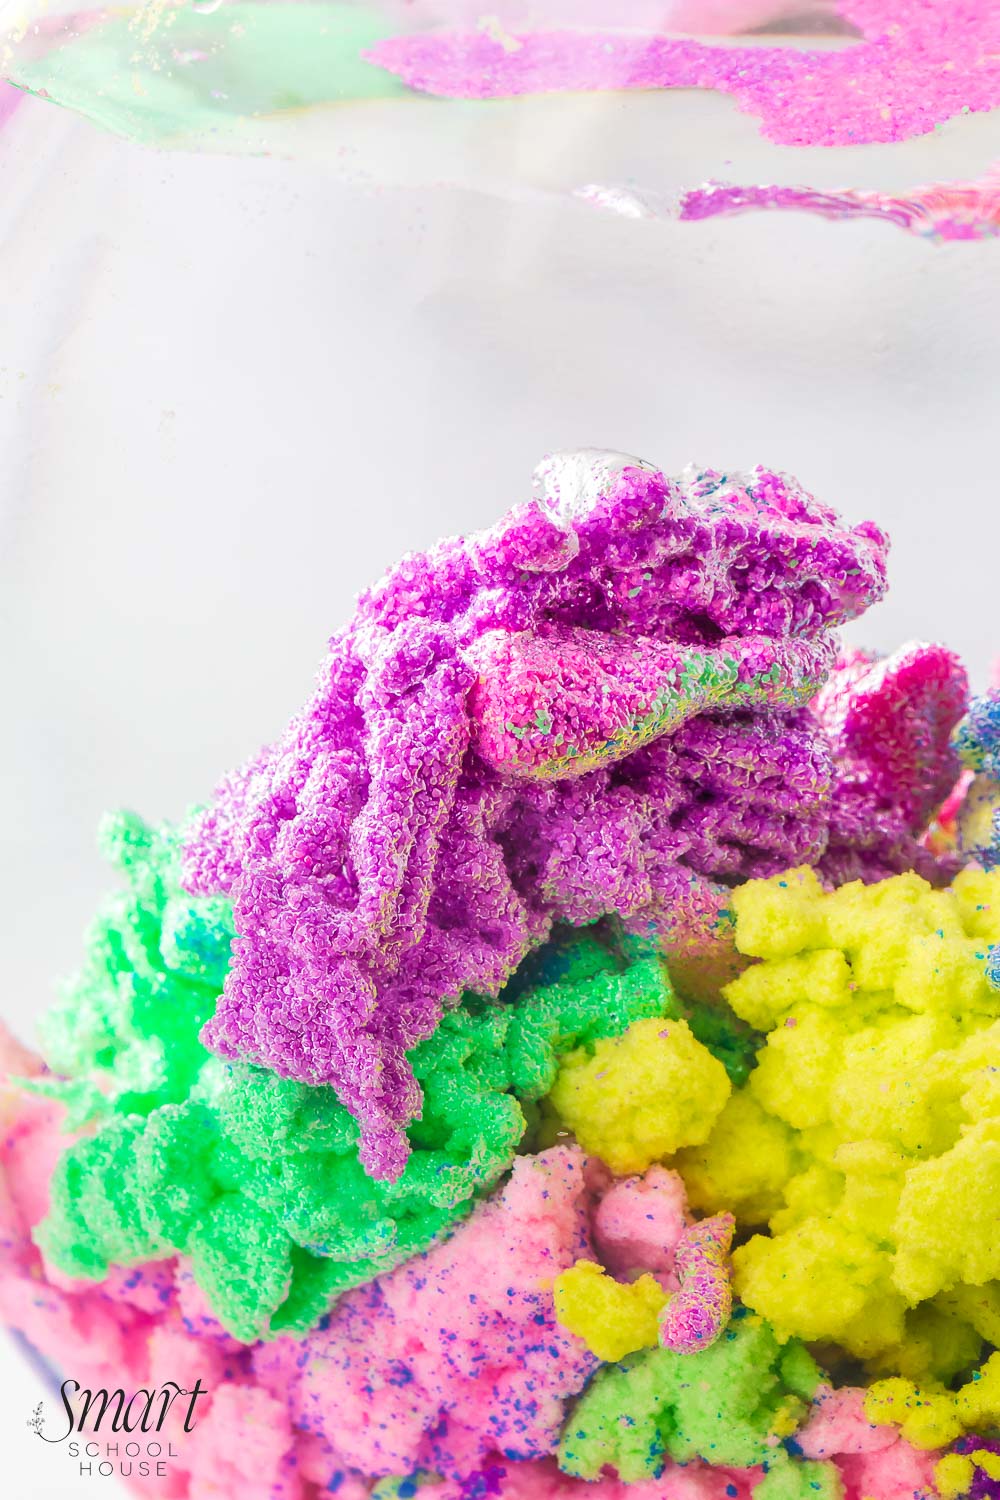 How to make Magic Sand that stays dry in the water! Also known as Aqua Sand, this fun and colorful waterproof sand is poured into water, creating a coral-like appearance that can be used over and over again!